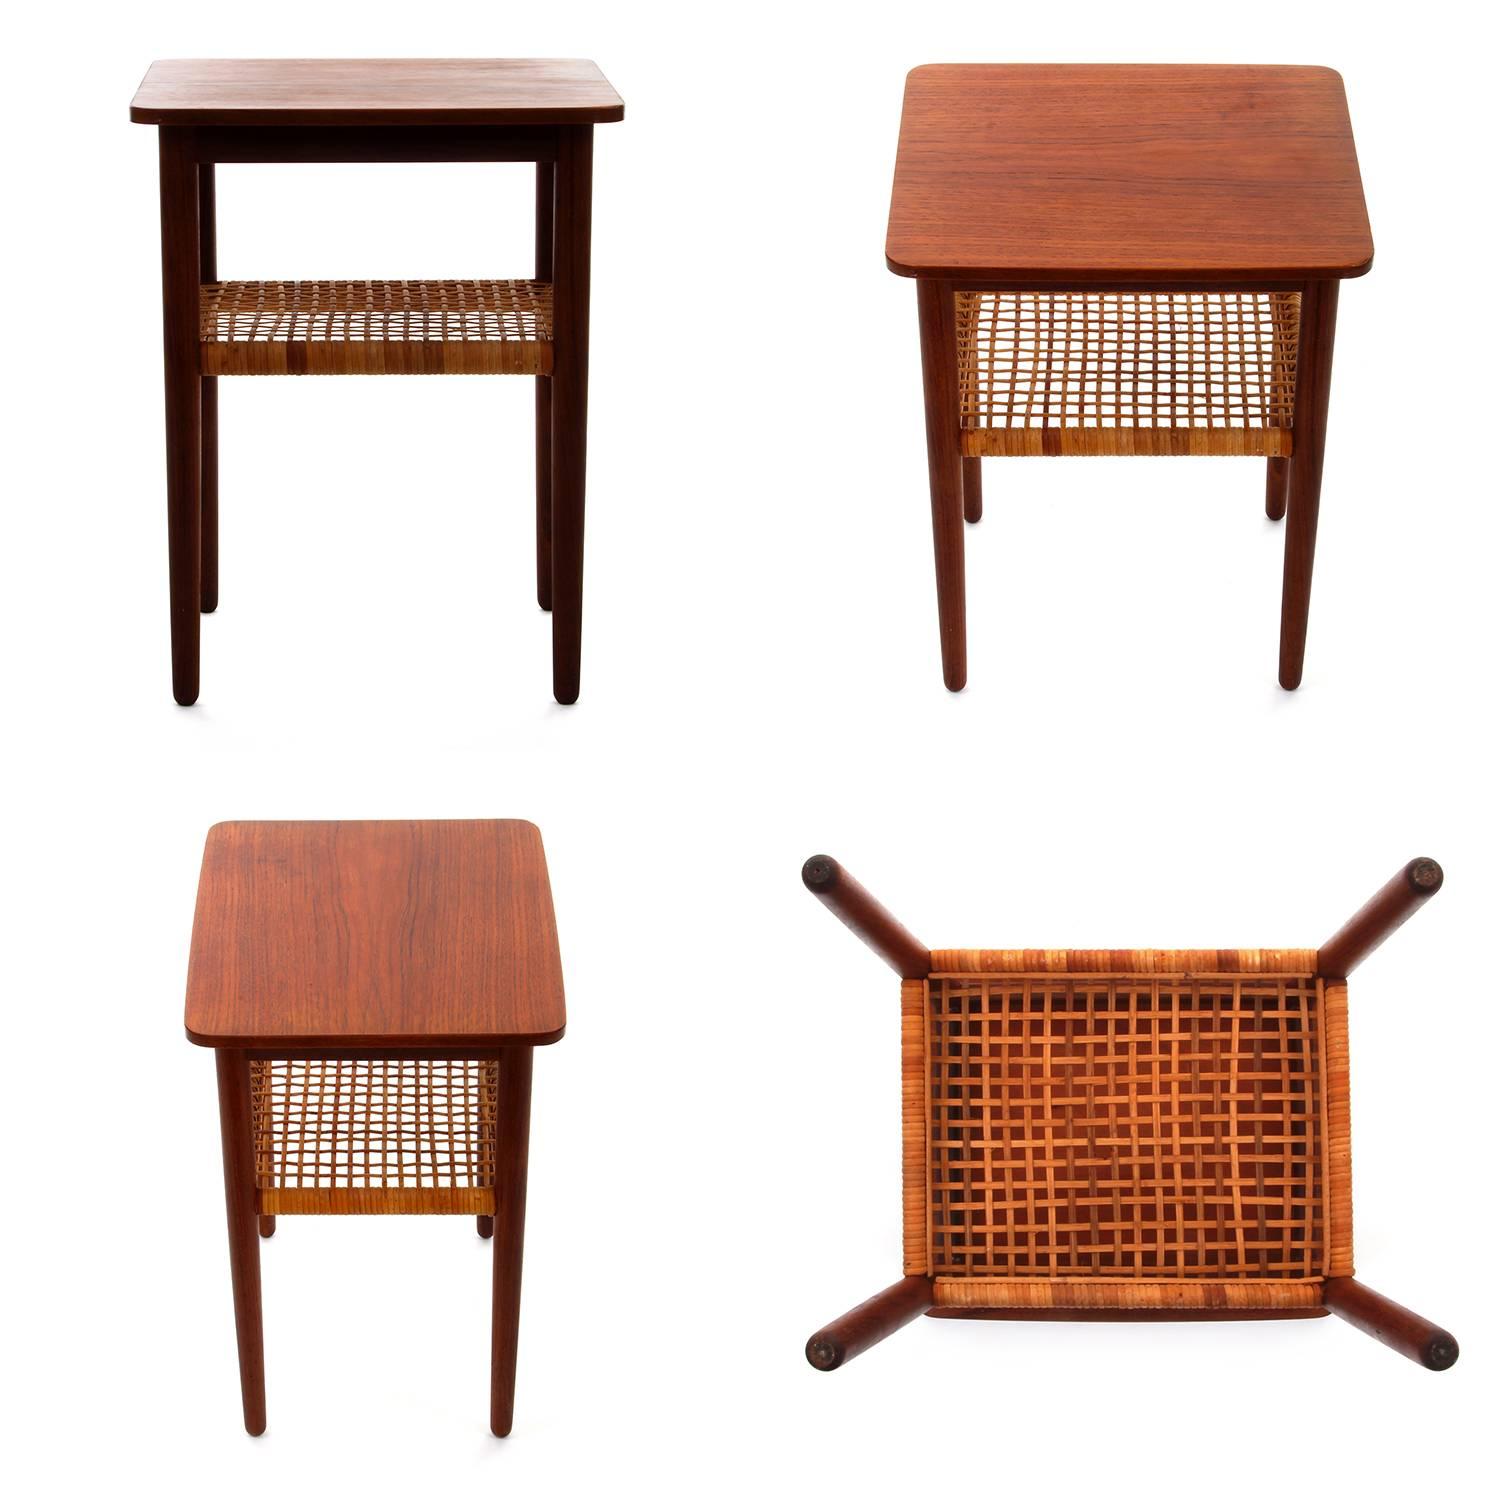 Teak and Rosewood Nesting Tables, 1950s, Danish Mid-Century Modern Nested Tables 2